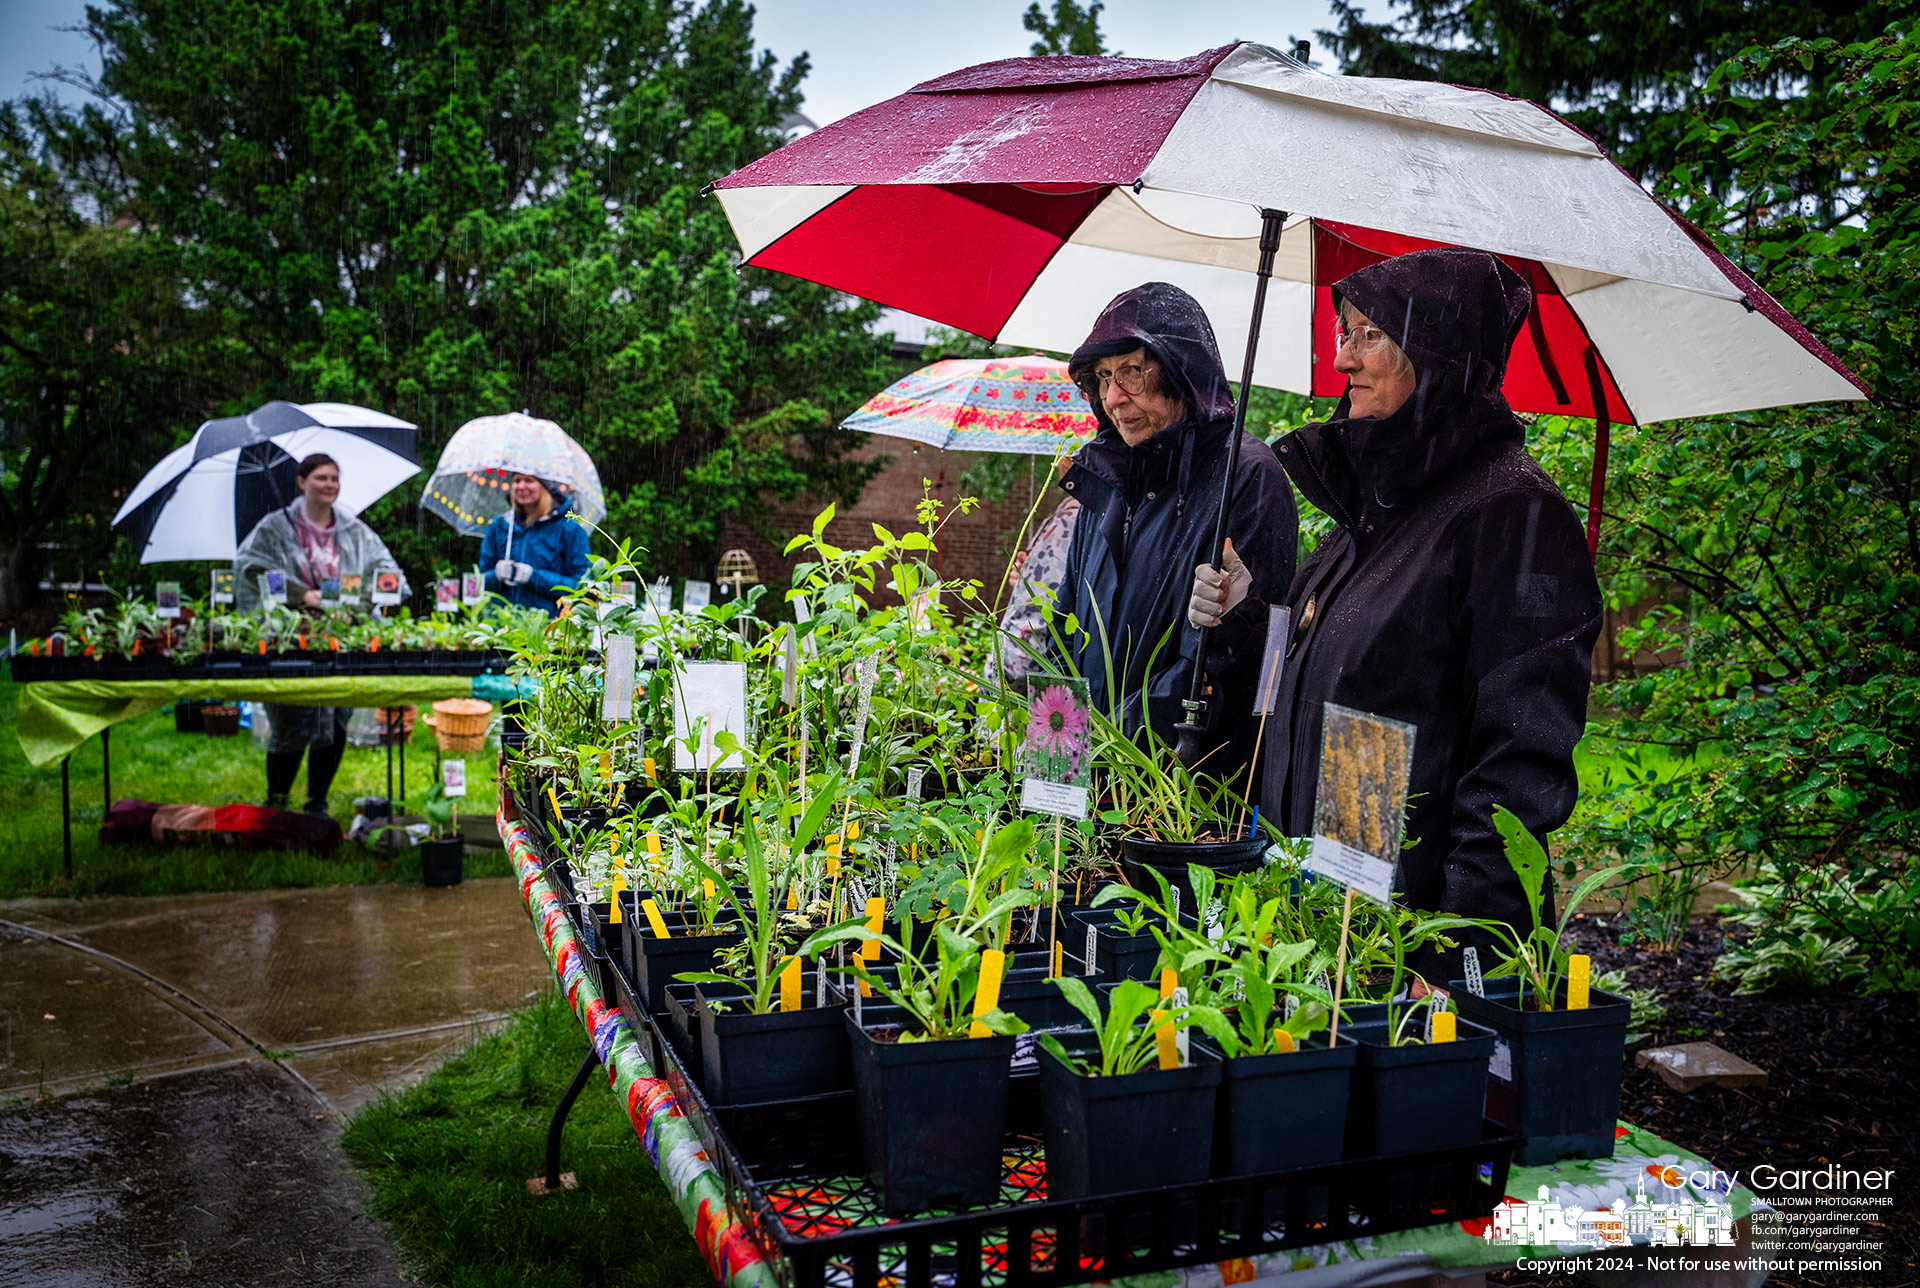 Volunteers and shoppers weathered early morning rain for the Westerville Garden Club's annual sale on the front lawn of the Masonic Lodge on South State Street. My Final Photo for May 11, 2024.